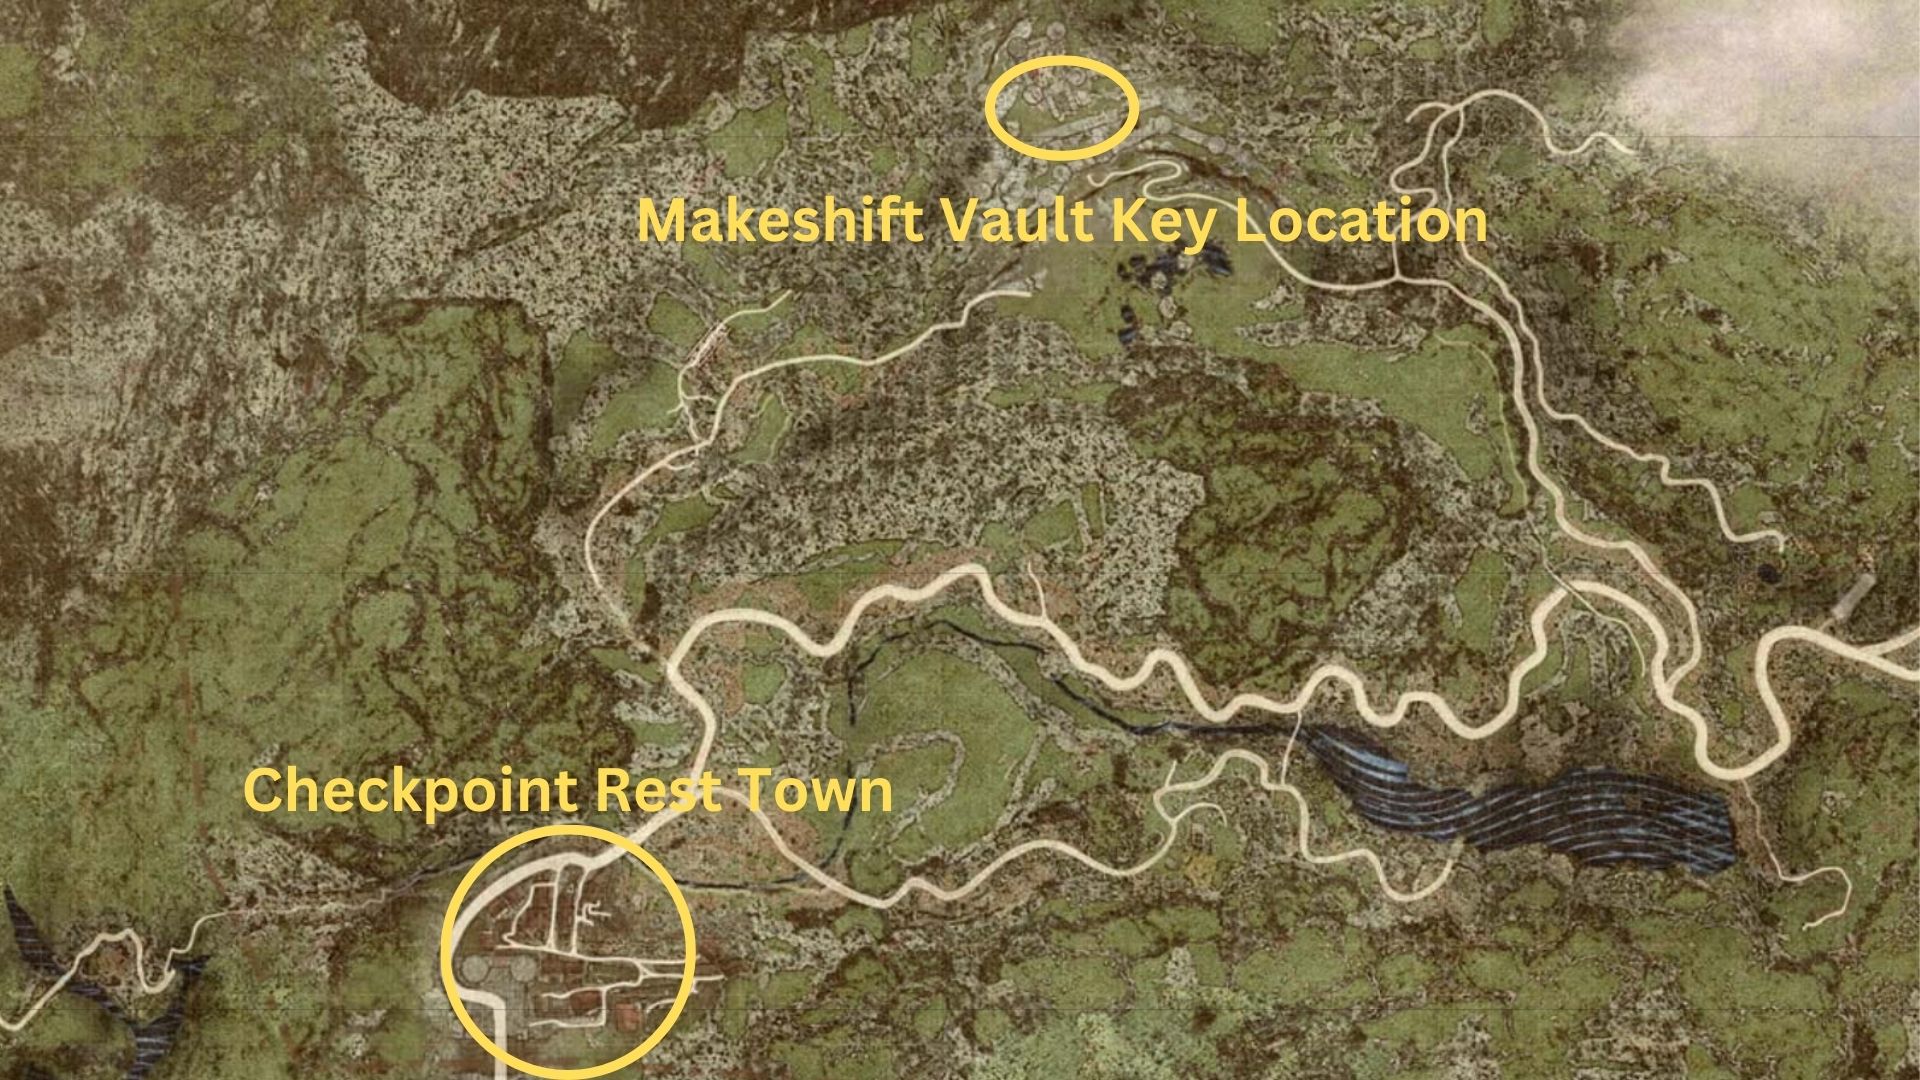 Showing location of Makeshift Vault Key and Checkpoint Rest Town on Dragon's Dogma 2 map